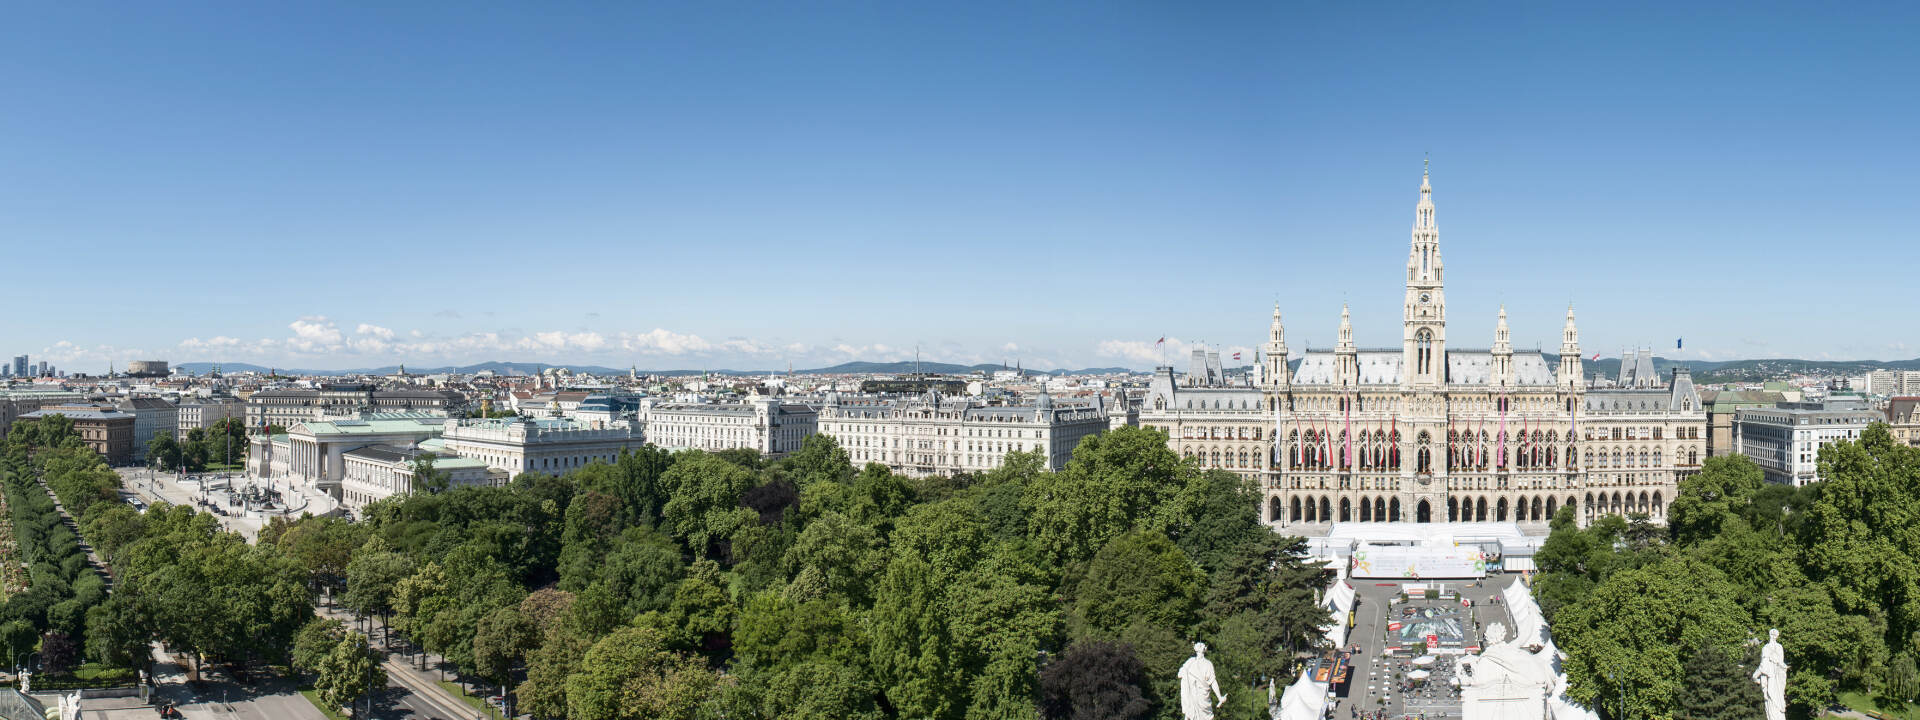 Vienna - view to Ringstrasse from the roof of Burgtheater © WienTourismus | Christian Stemper